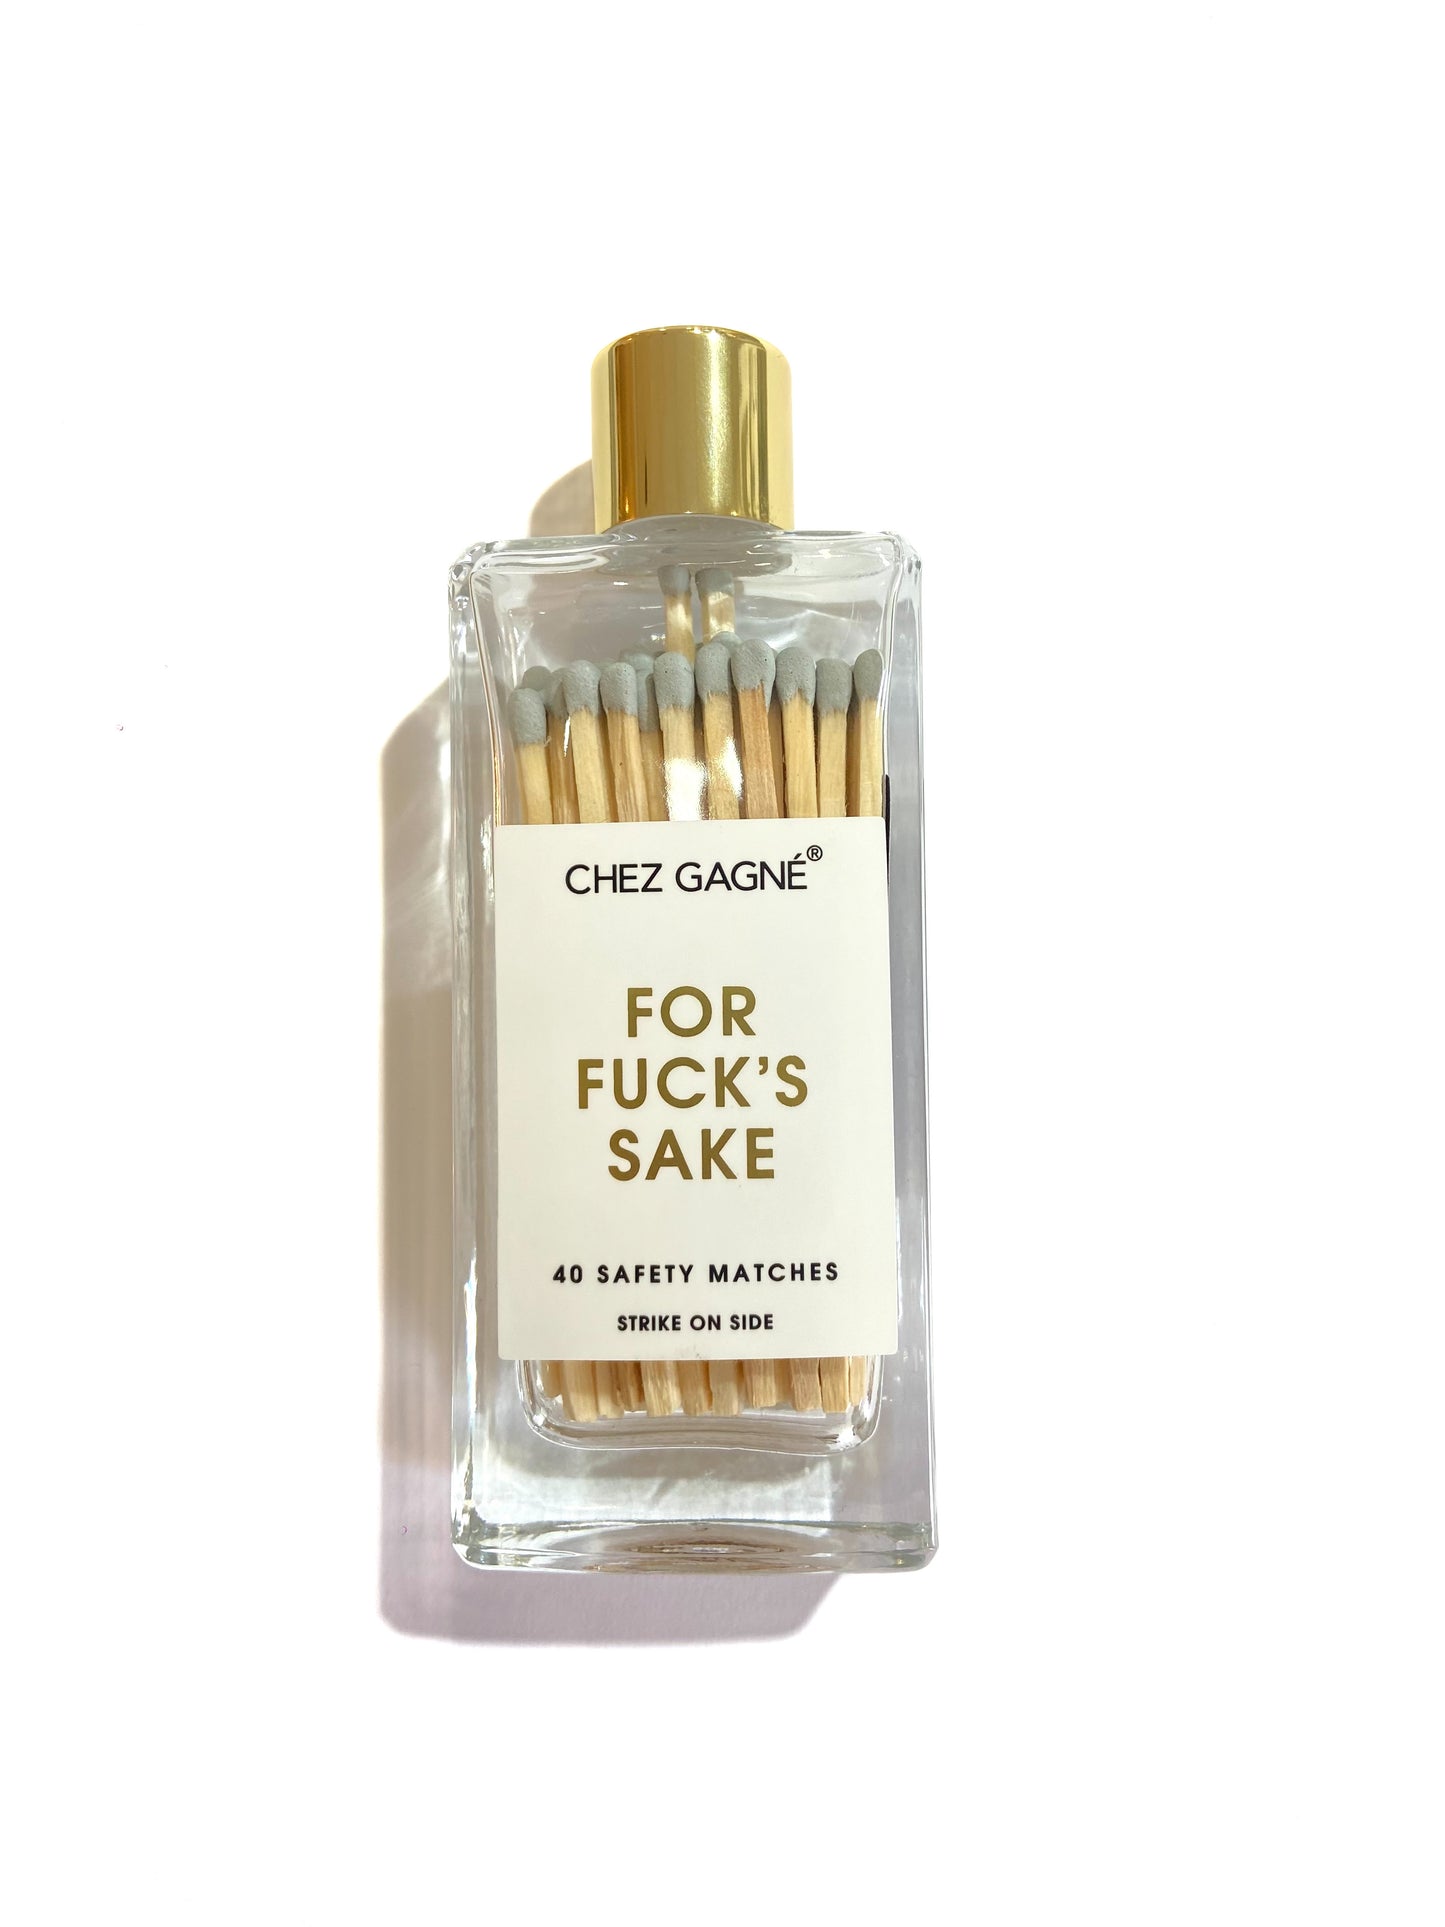 “Funny Sayings” Perfume Bottle Gold Matches